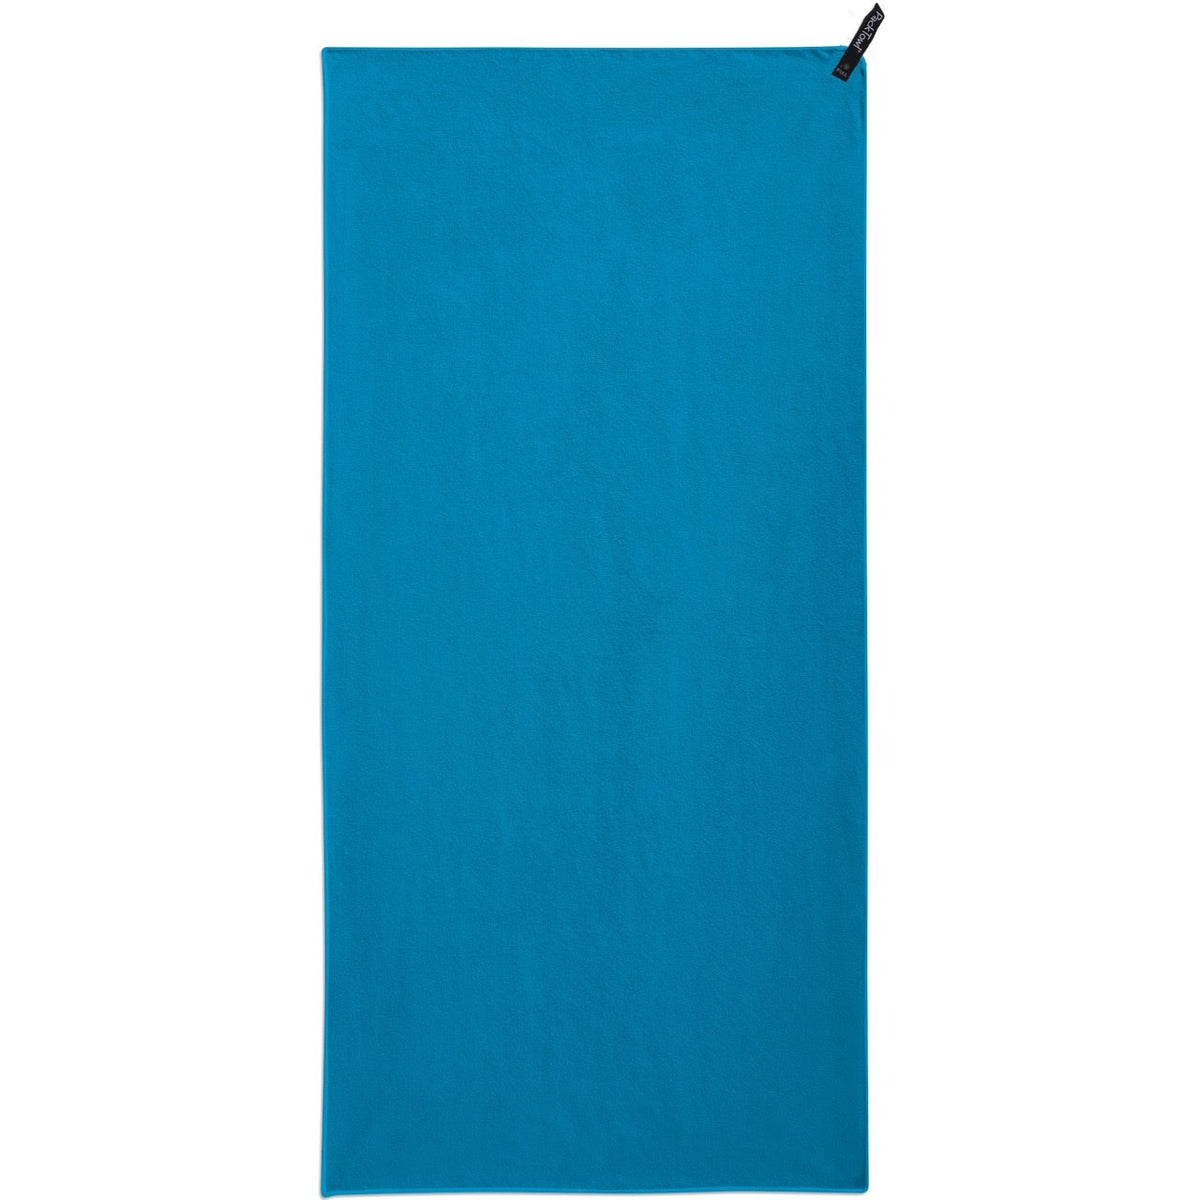 Packtowl Personal Towel - Hand size in Lake colour